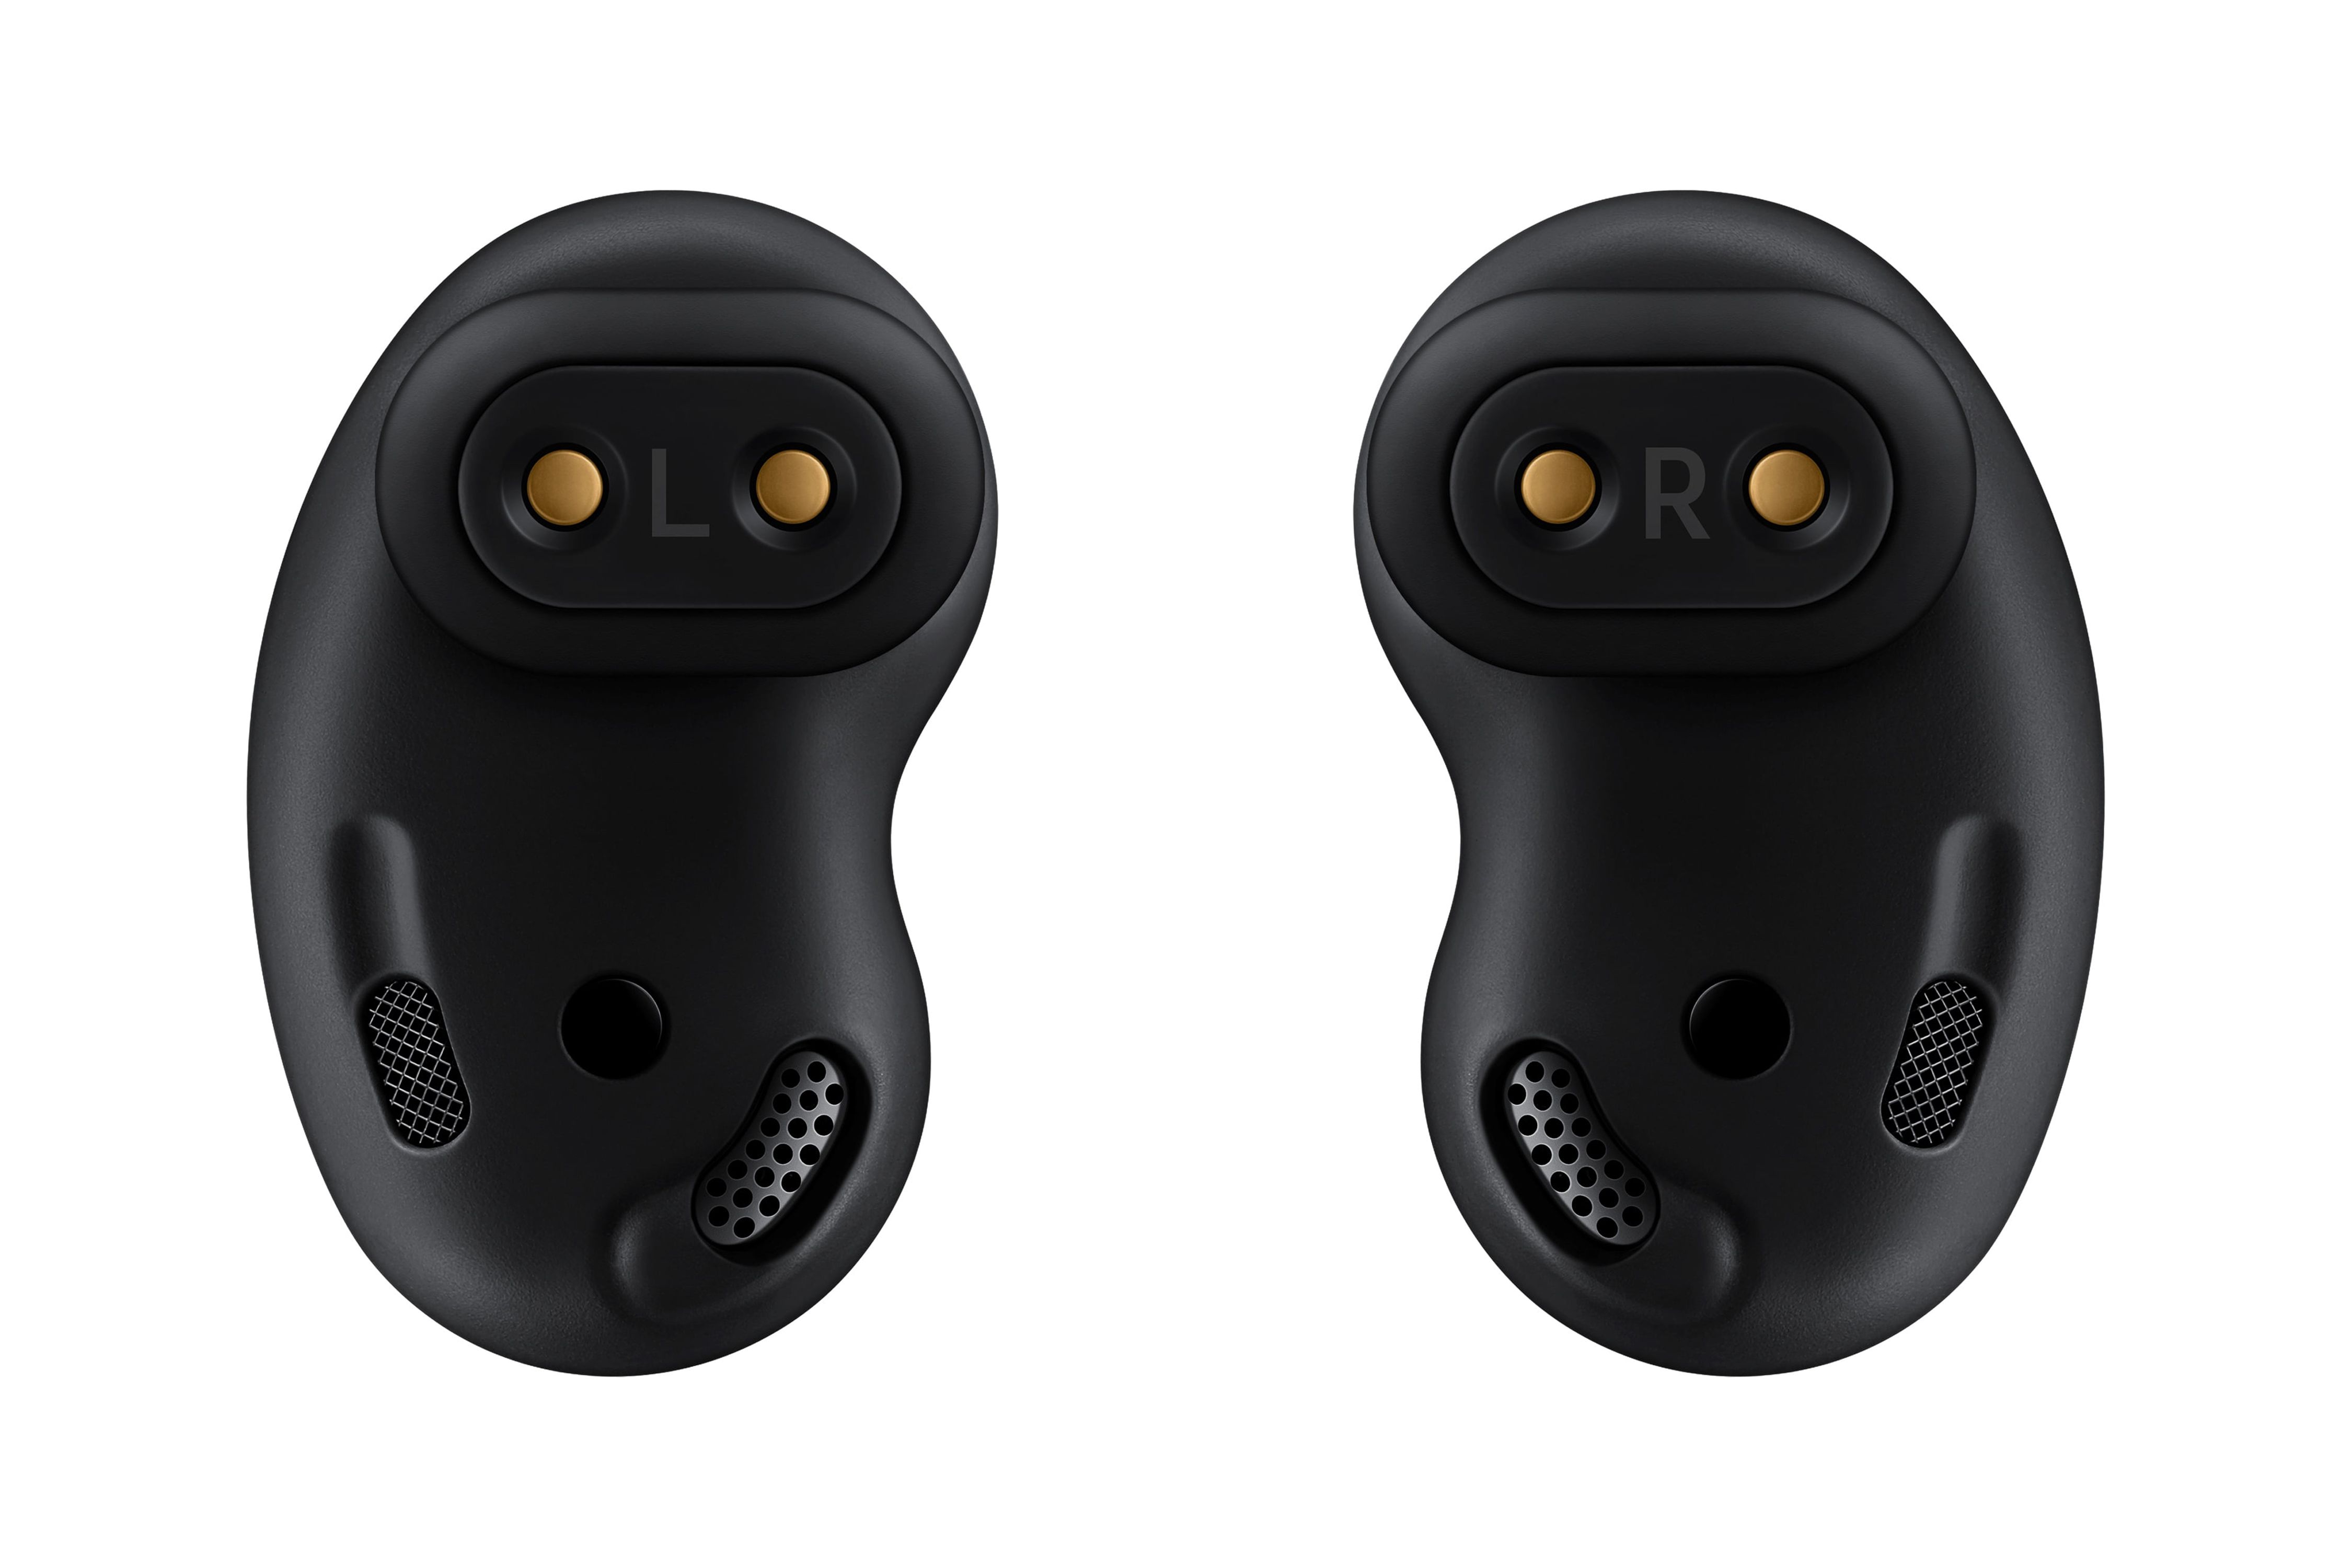 Samsung Galaxy Buds Live Bluetooth Earbuds, Noise Canceling and True Wireless, Onyx Black - image 10 of 12